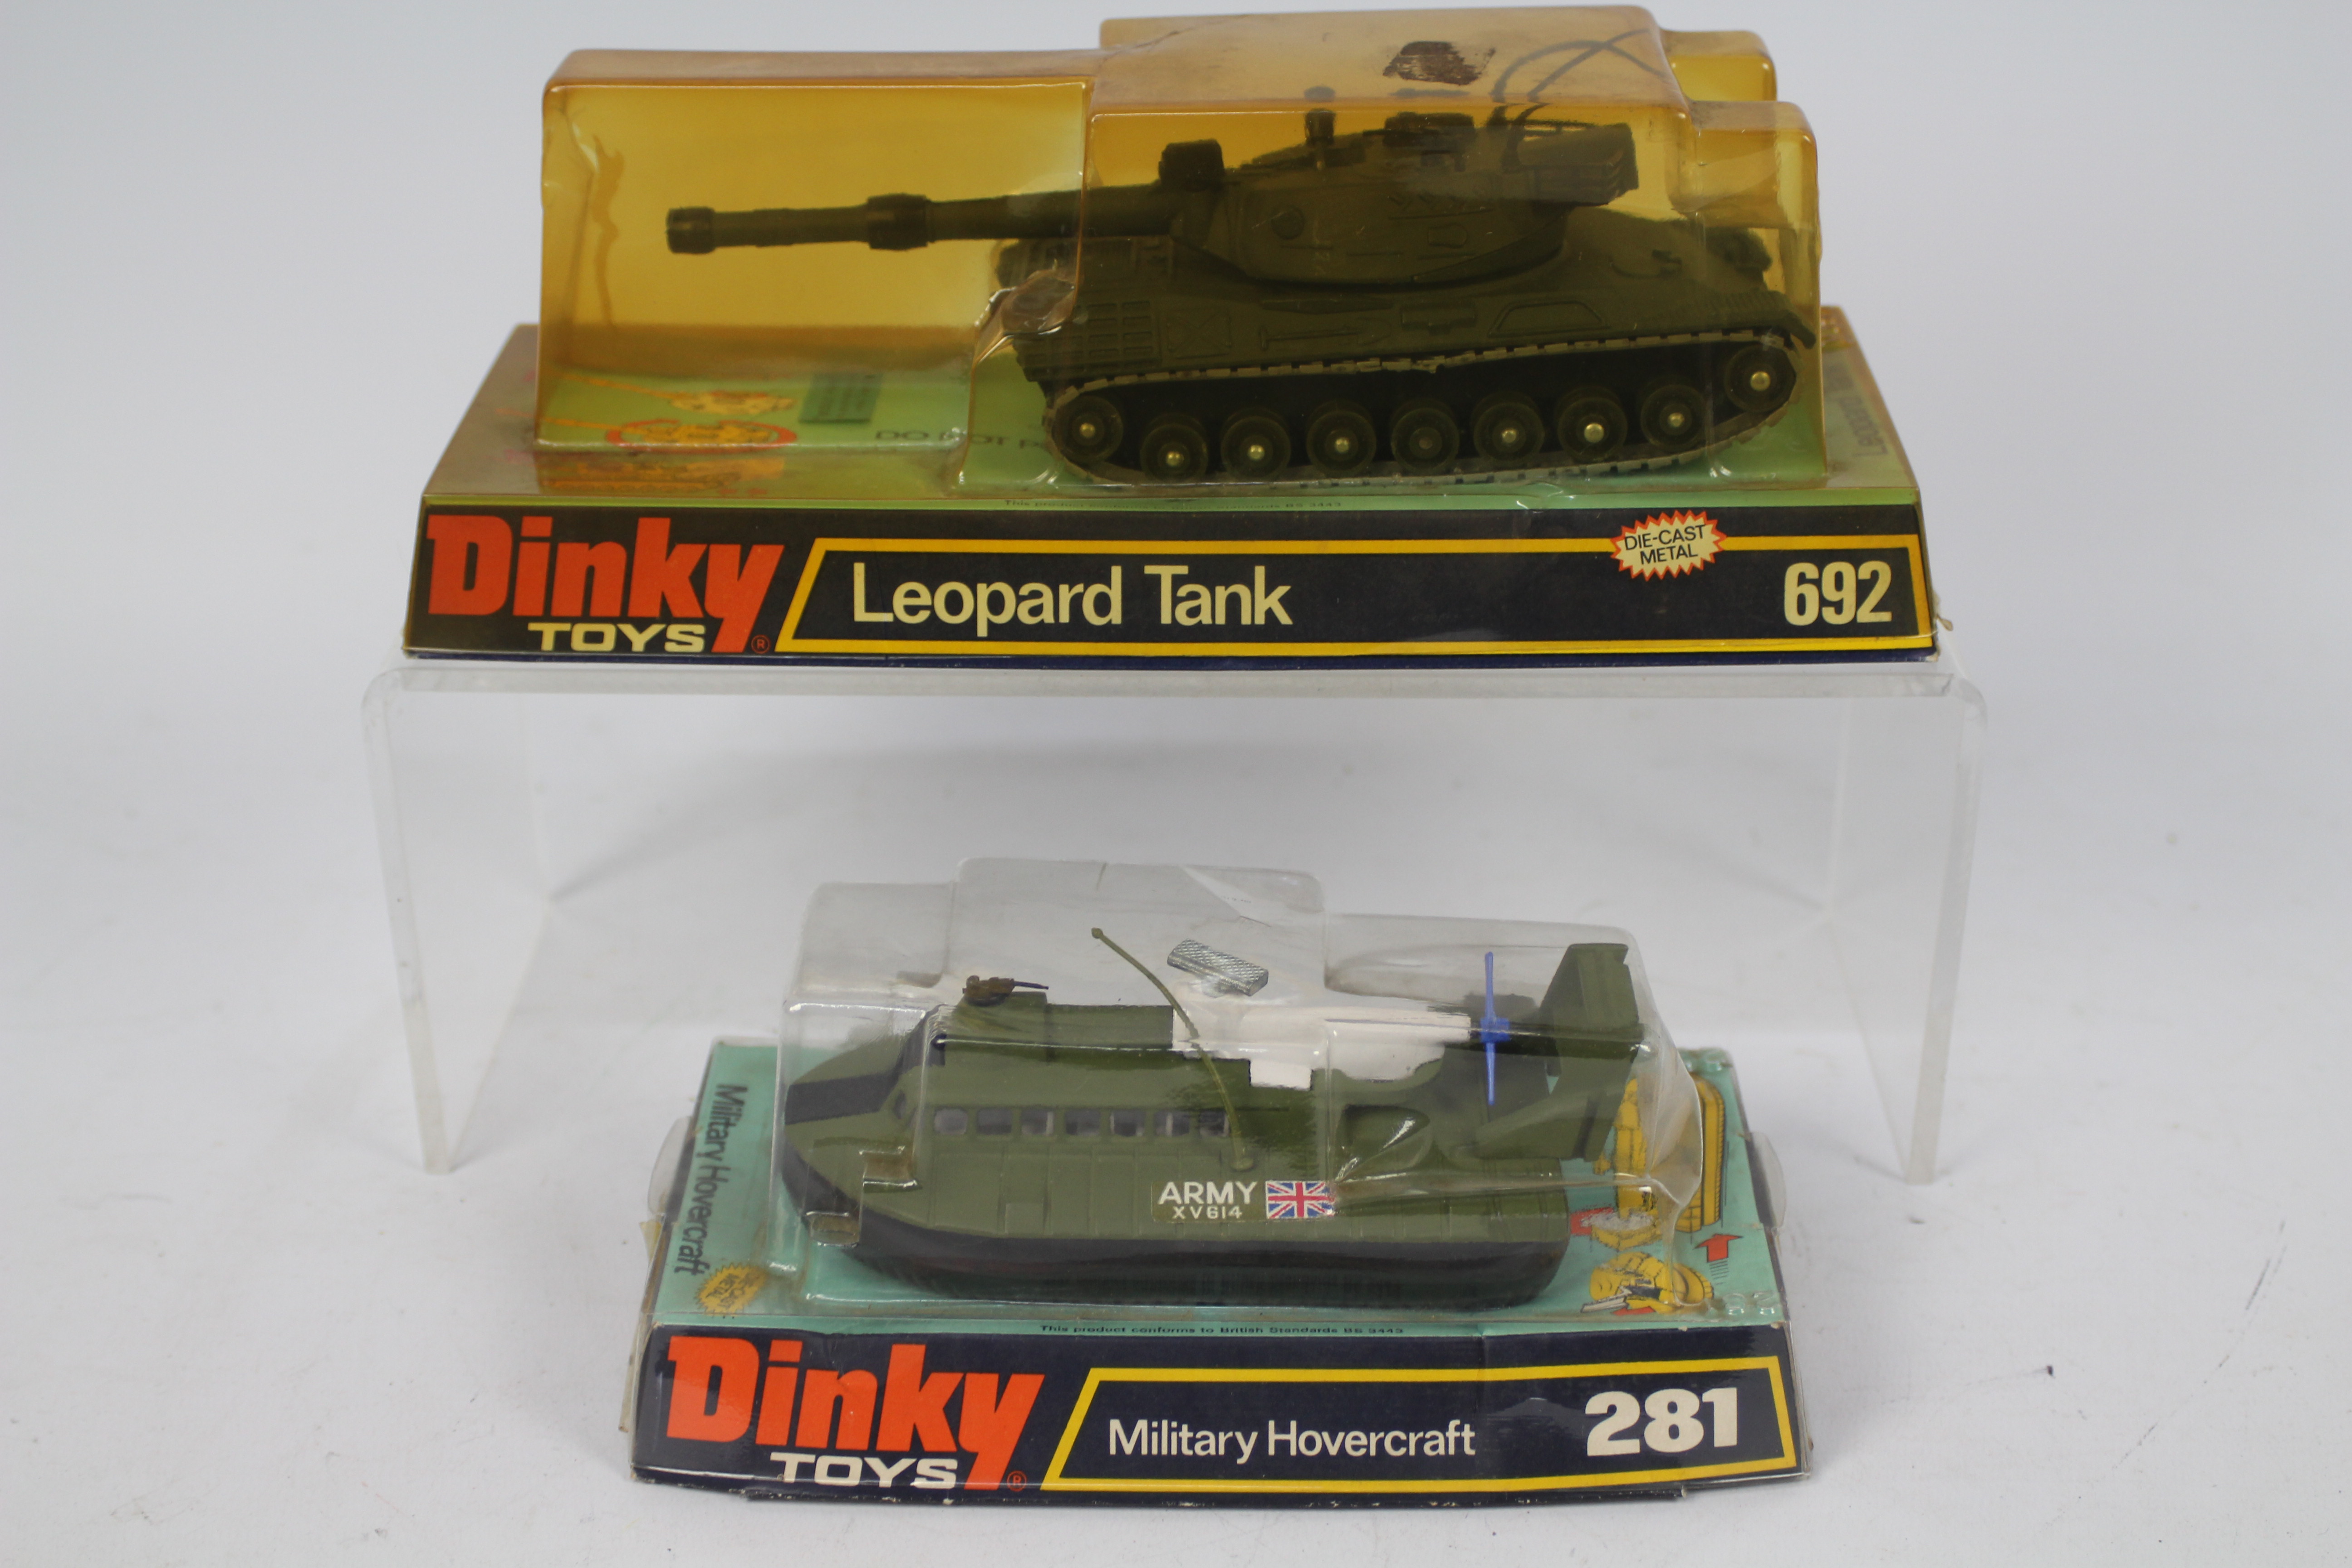 Dinky Toys - A Boxed Military Hovercraft #281appearing in Mint condition.